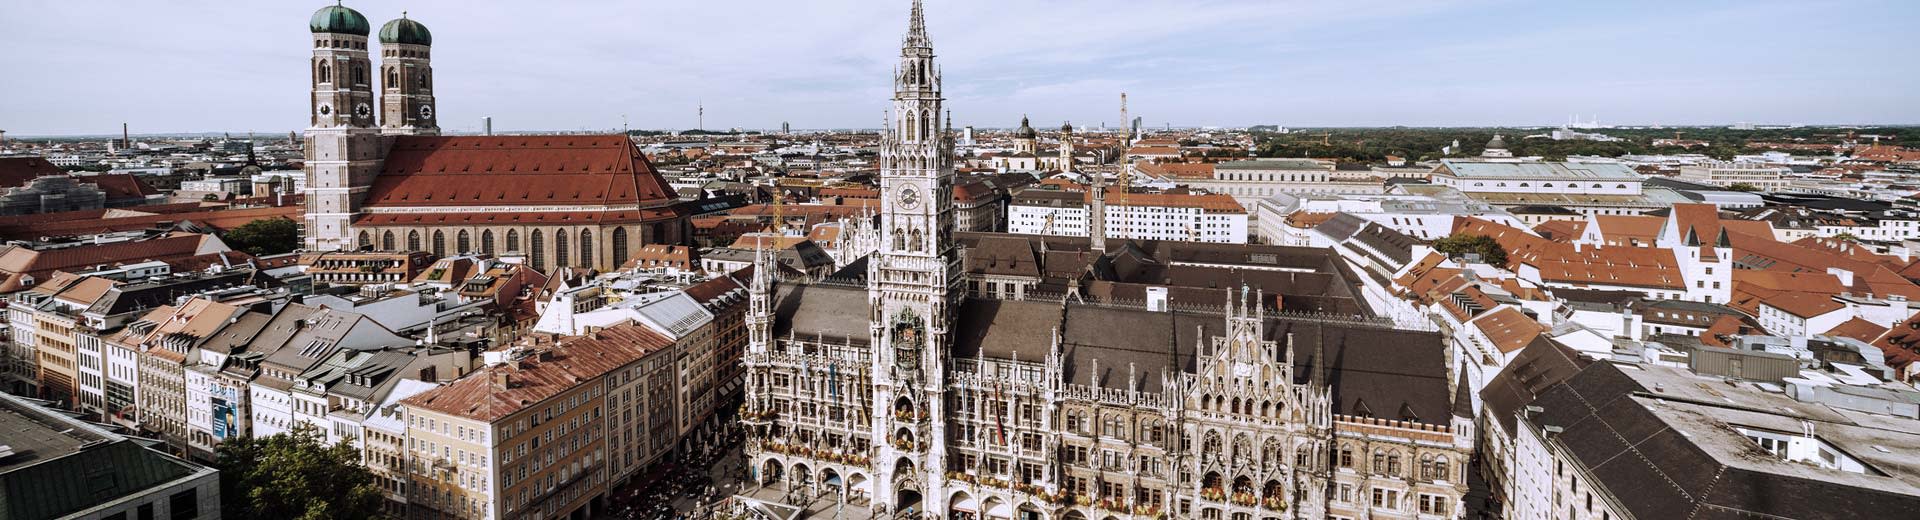 A beautiful town square in Munich on a clear day, with church steeples dominating the skyline.